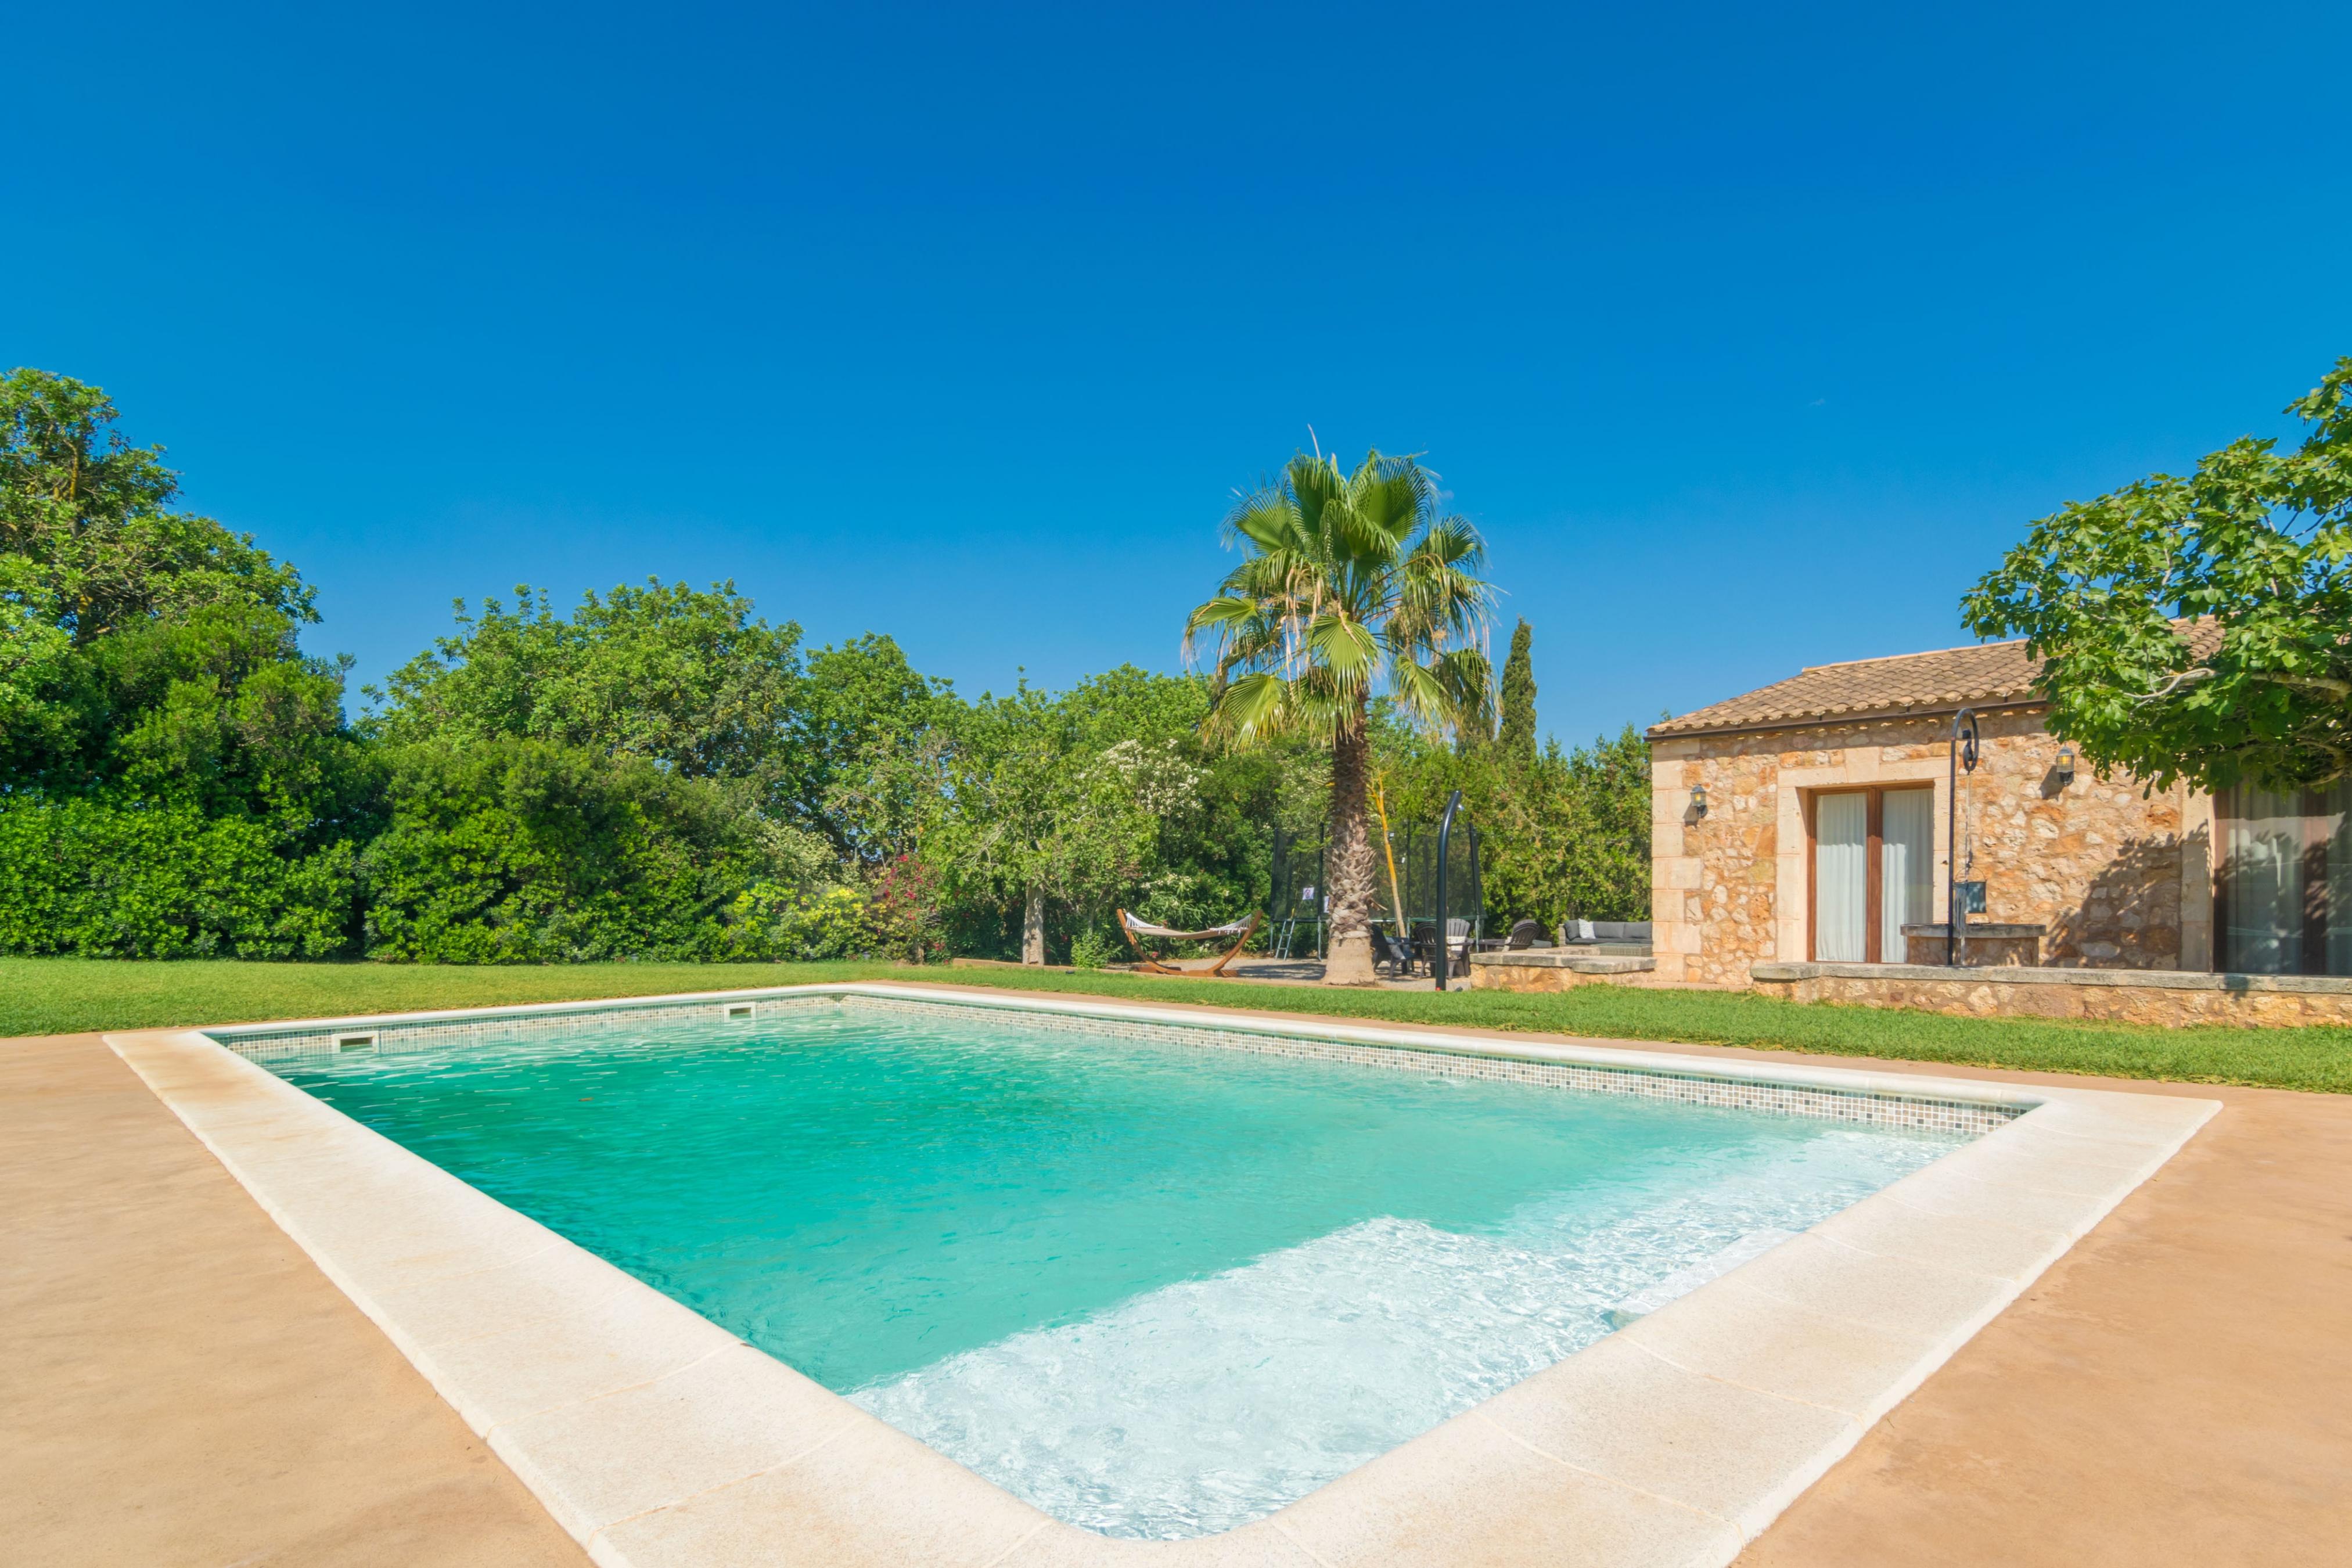 Property Image 1 - SA PUNTA - Villa with private pool in Son Carrio. Free WiFi